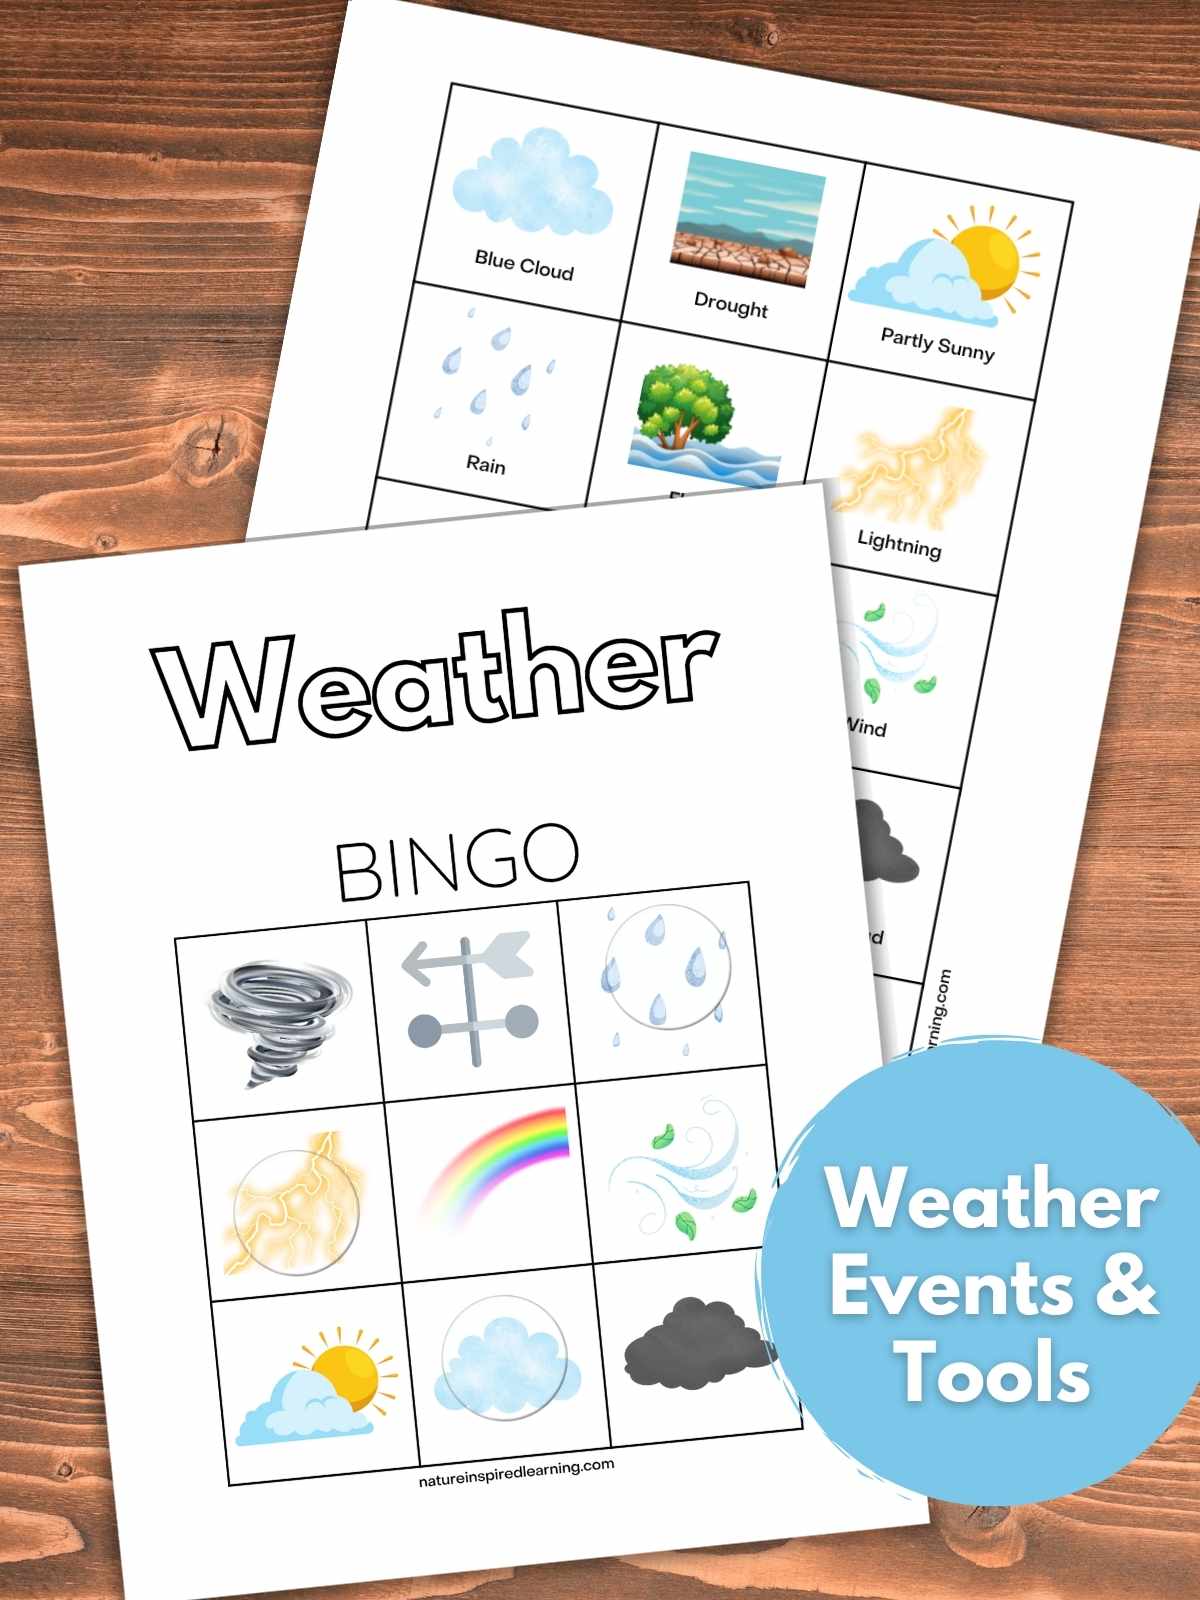 free printable weather bingo card and calling cards overlapping on a wooden background. Light blue circle bottom right with text overlay